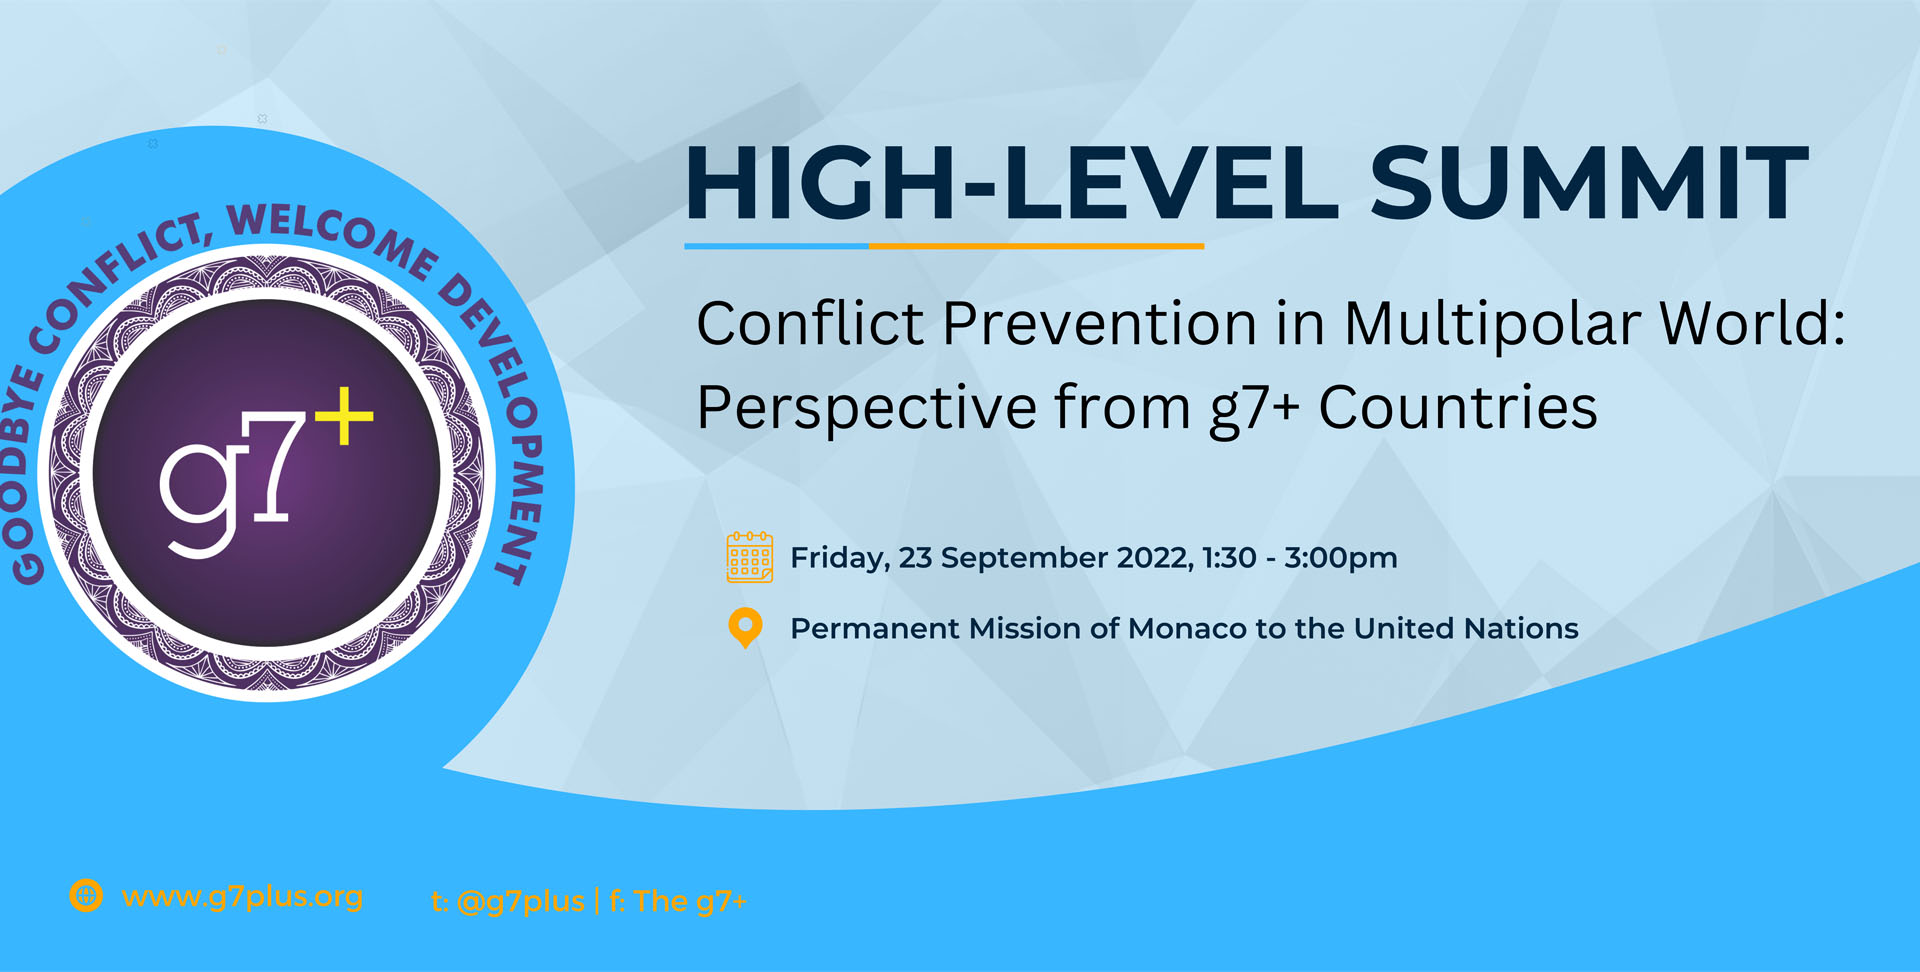 g7+ organized High-level Summit “Conflict prevention in a multipolar world, Perspective from g7+ countries